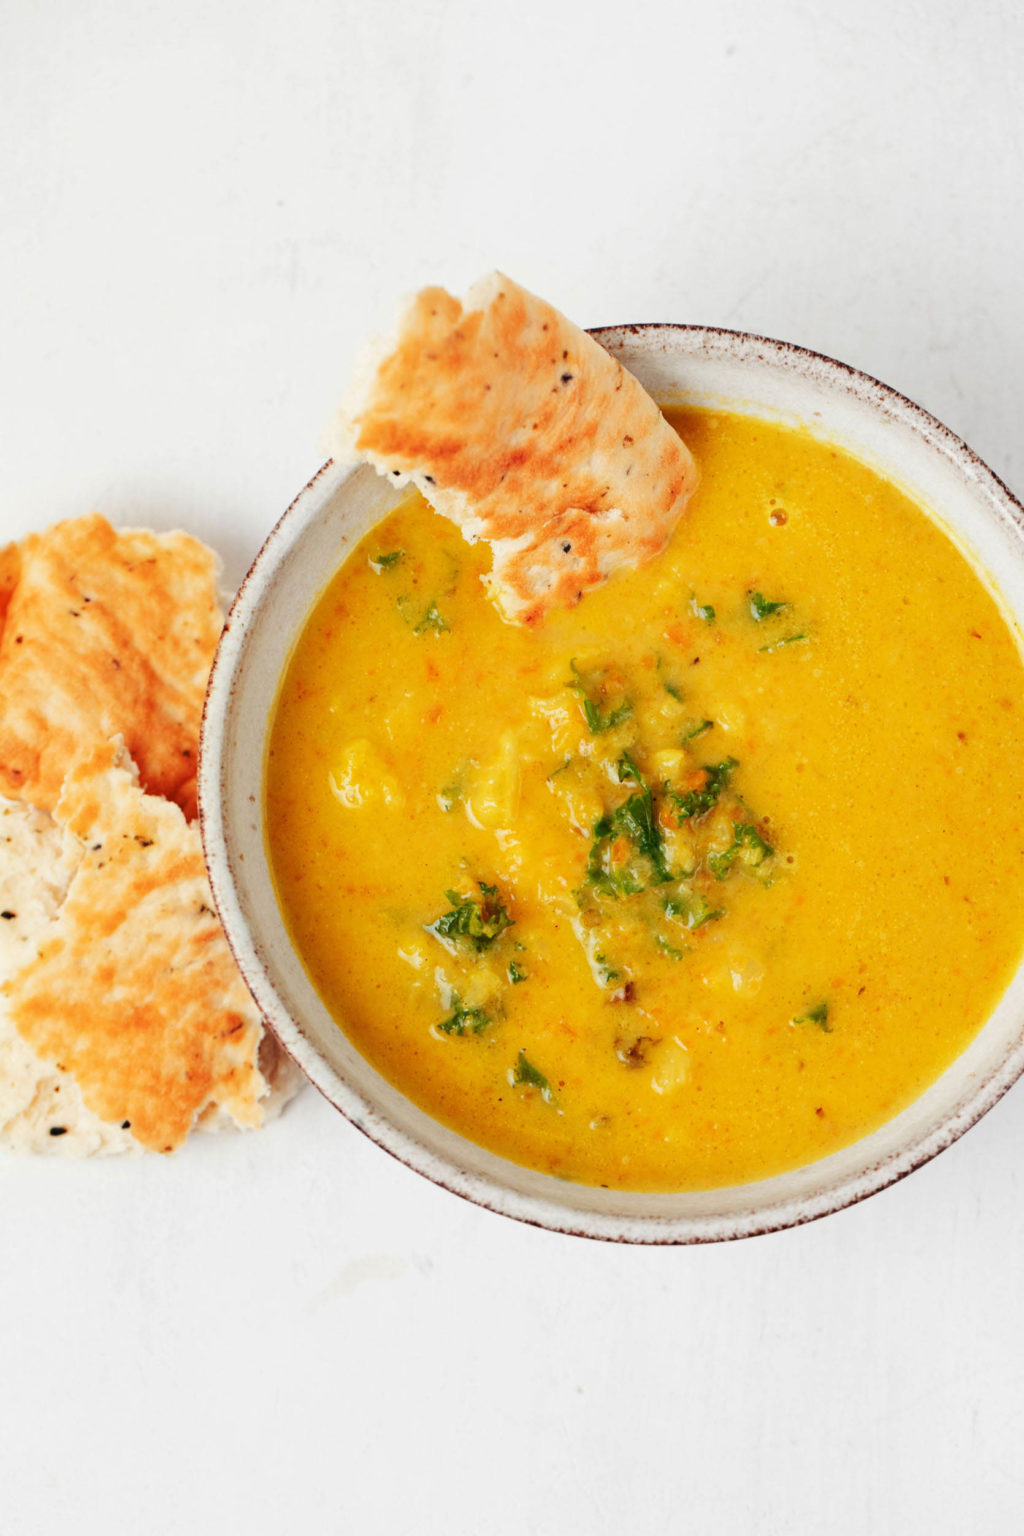 A close-up, overhead image of a bright golden-colored soup that is flecked with greens. It's served with flatbread.